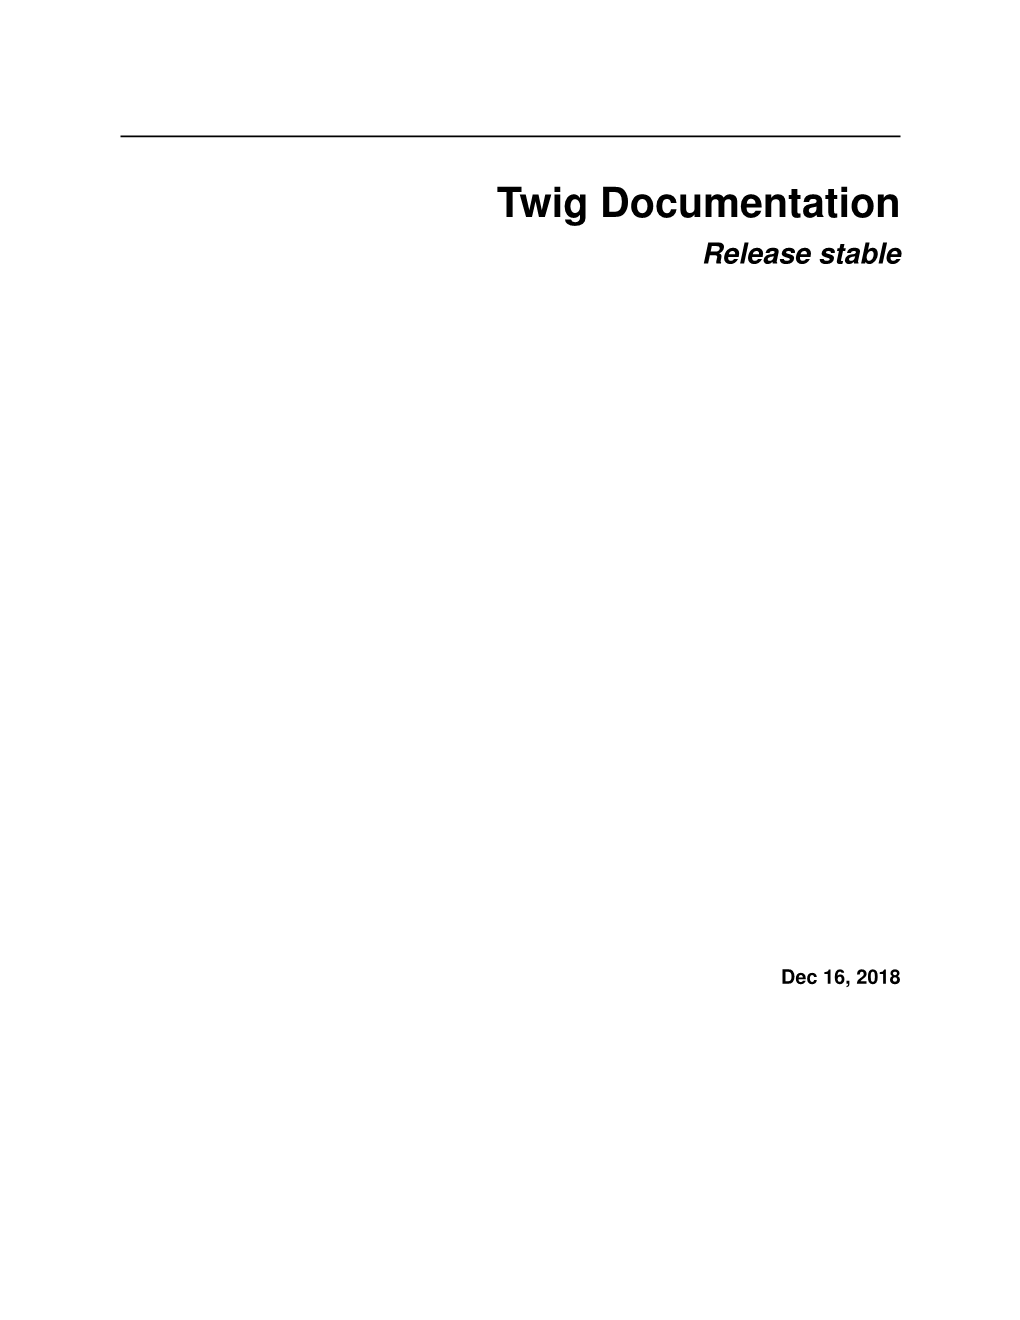 Twig Documentation Release Stable